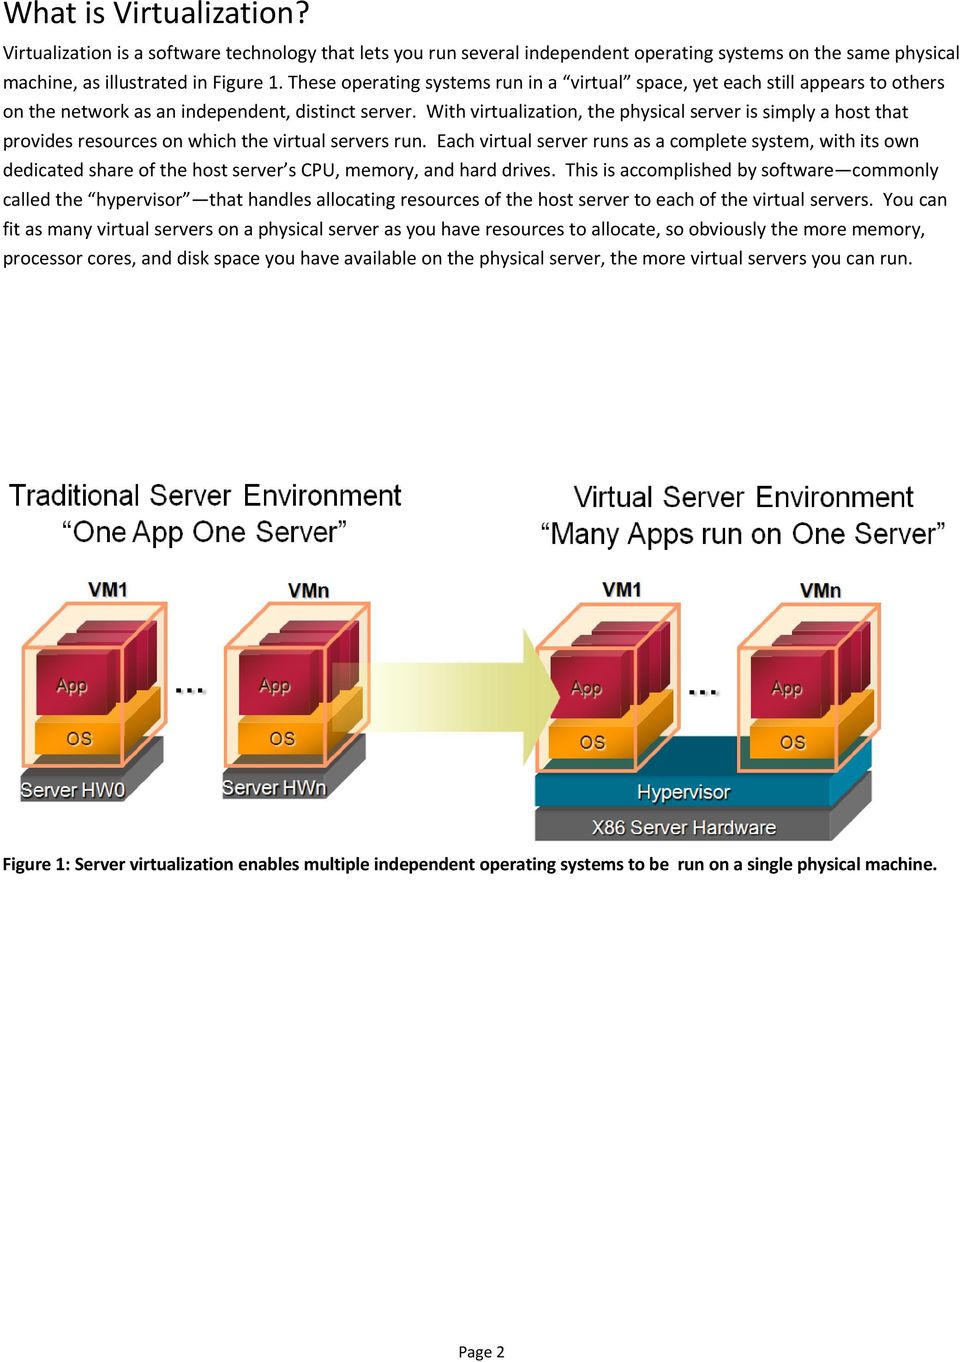 With virtualization, the physical server is simply a host that provides resources on which the virtual servers run.